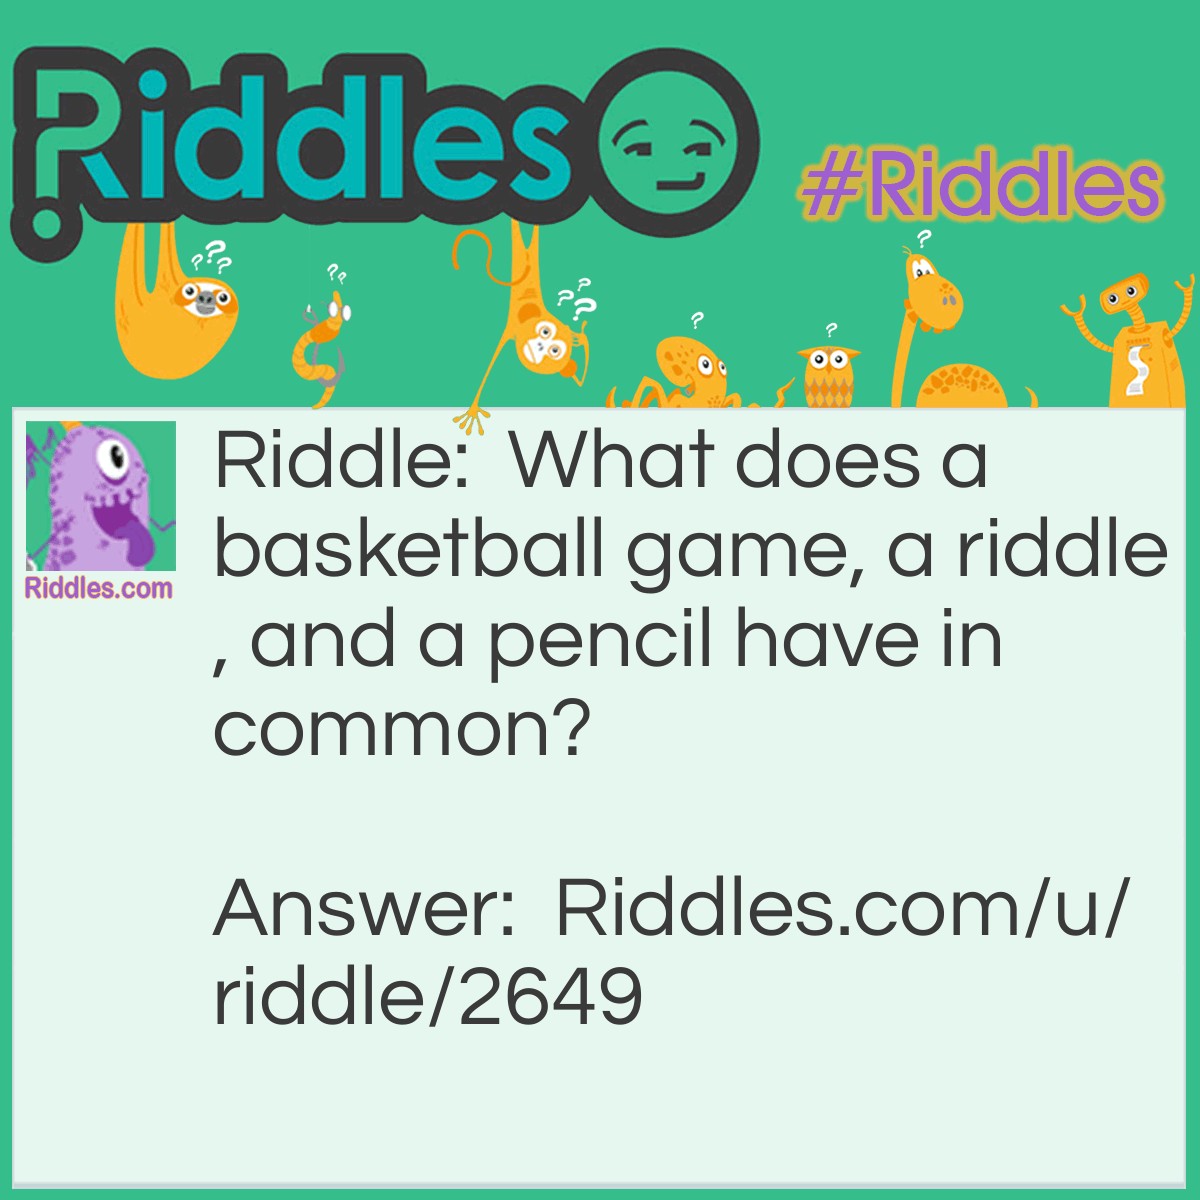 Riddle: What does a basketball game, a riddle, and a pencil have in common? Answer: They're all no good without a point. (Random Guy): You make a good point. (Me): That's kinda the point.